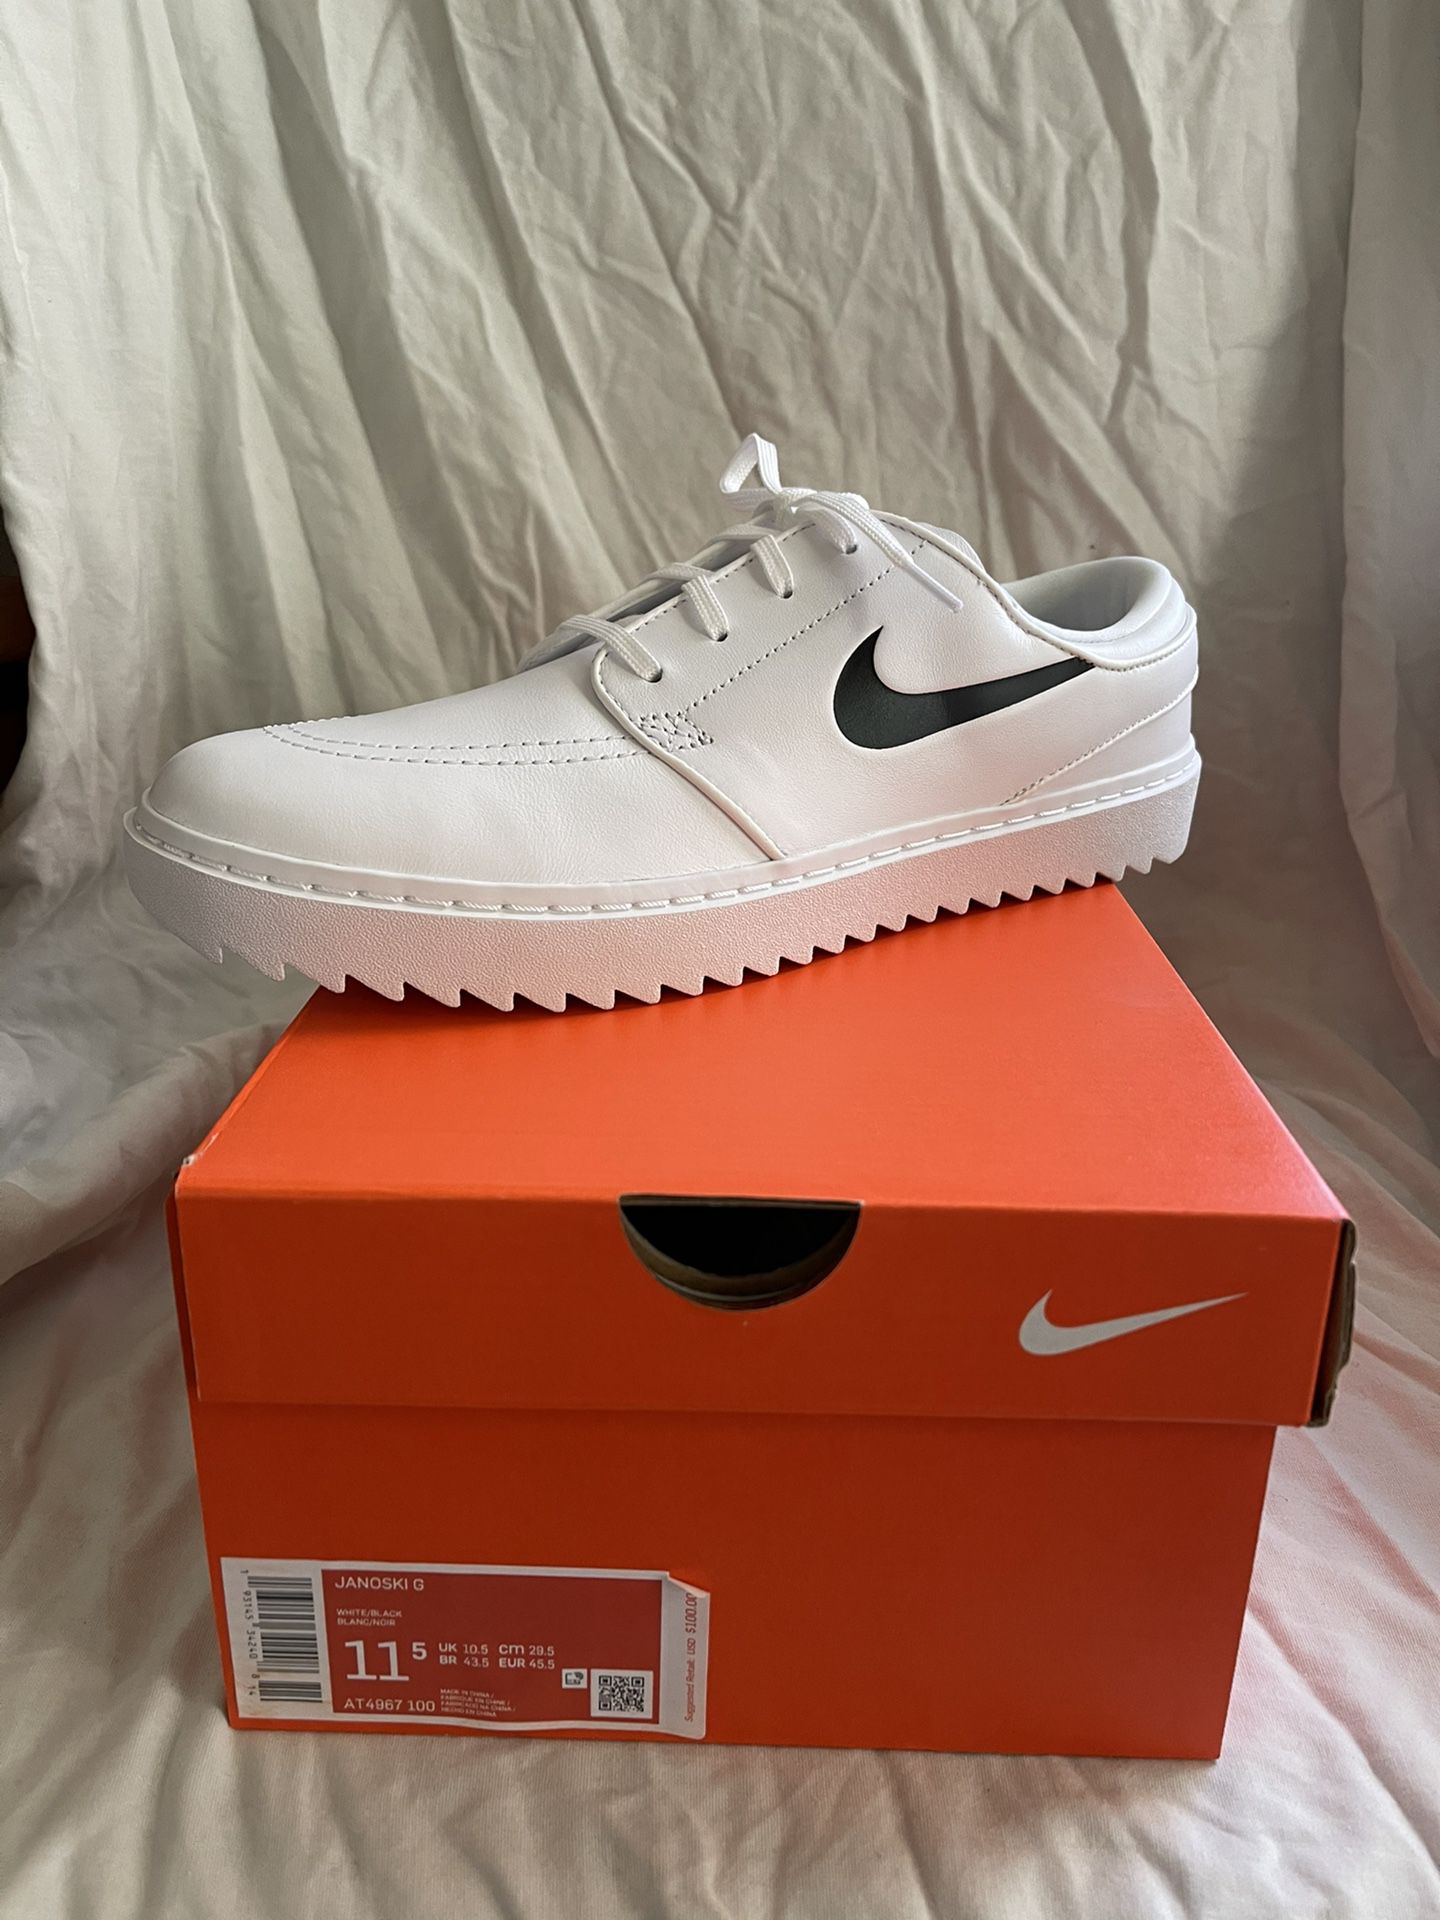 Trin at opfinde areal Nike Janoski G Golf Shoe 11.5 for Sale in El Paso, TX - OfferUp